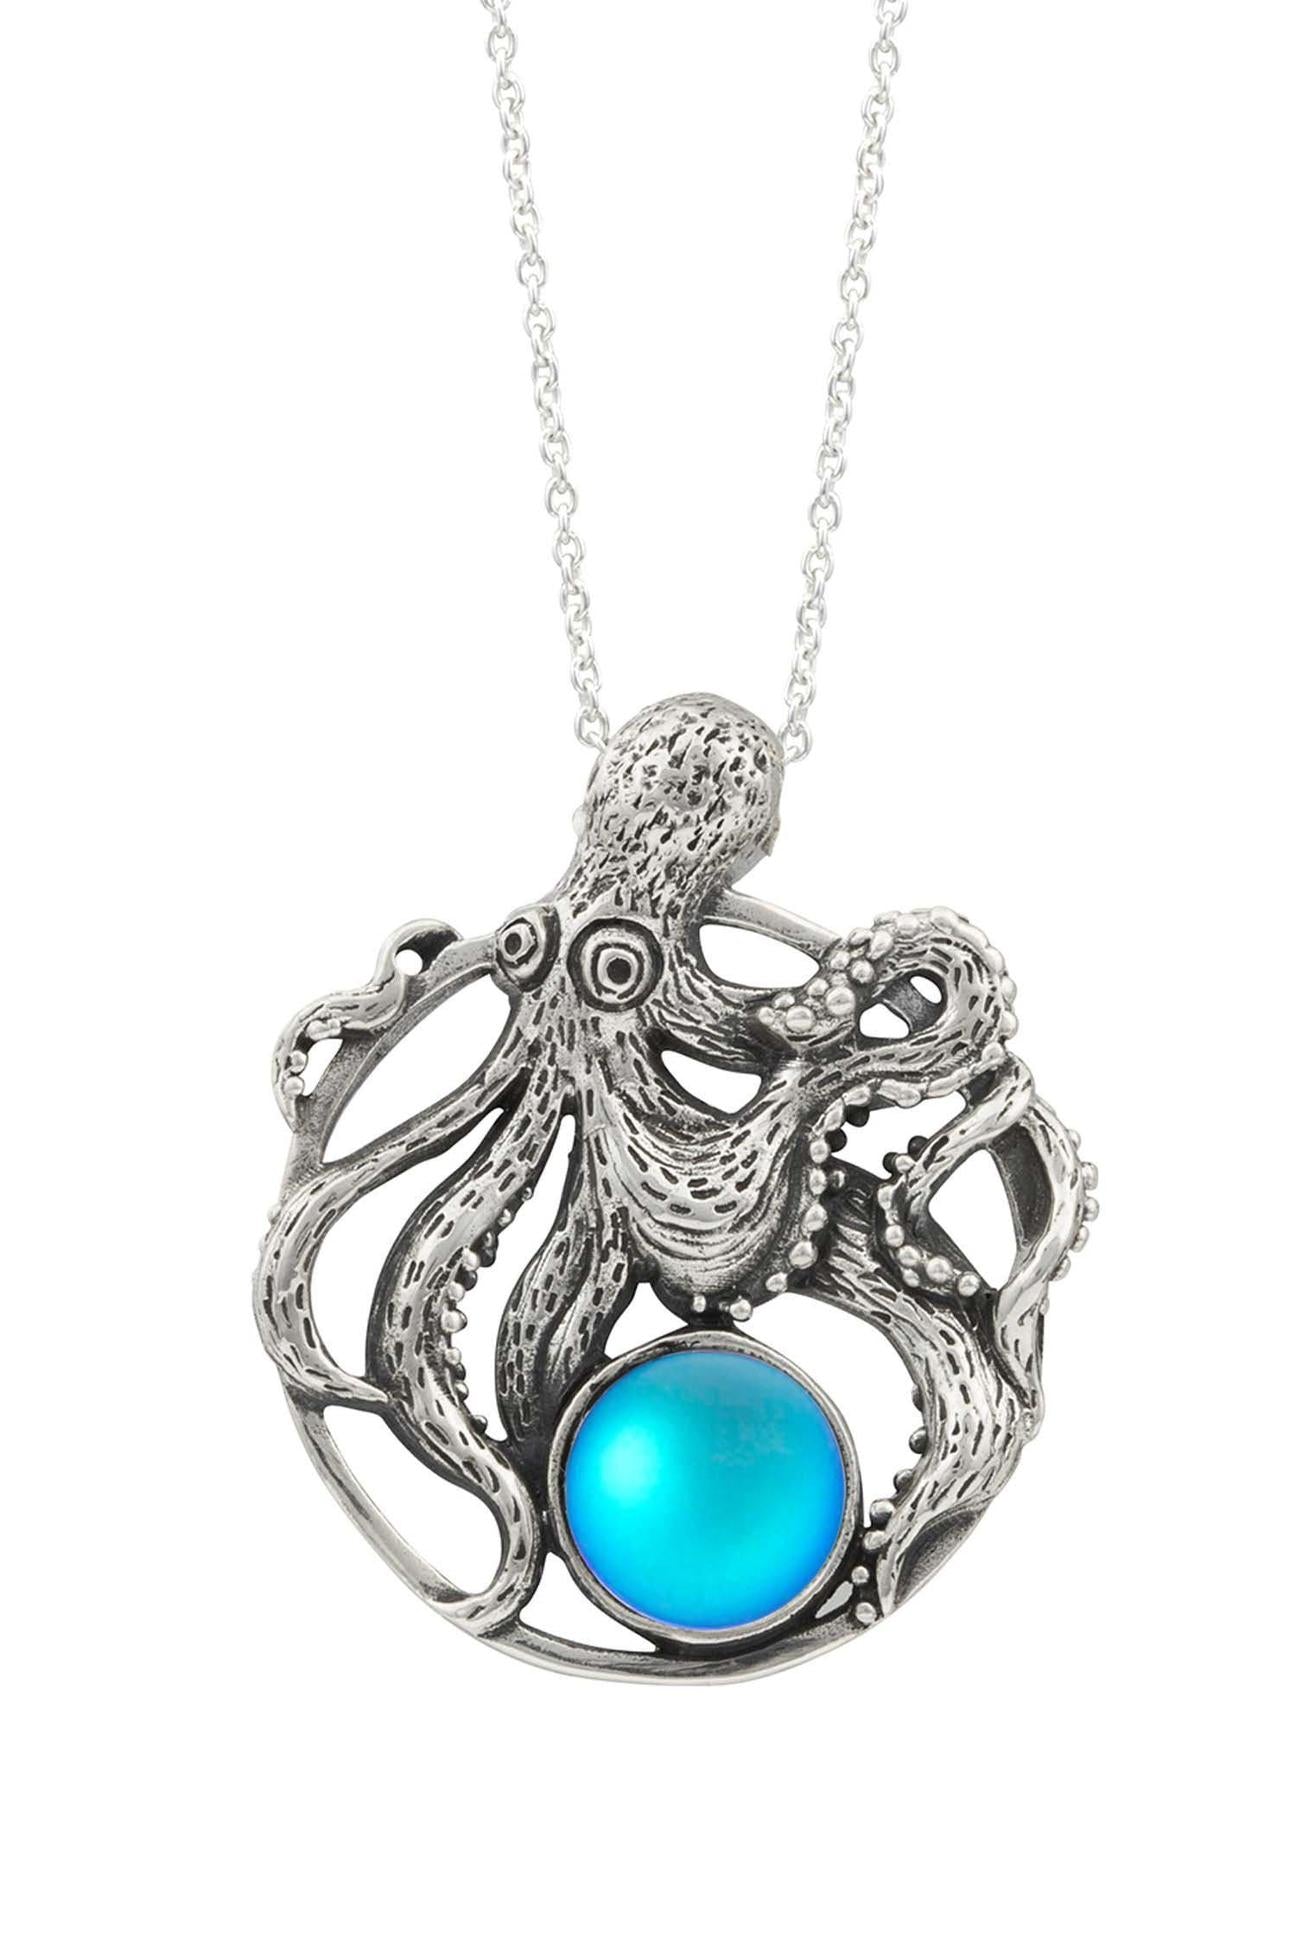 LeightWorks Crystal Octopus Pendant